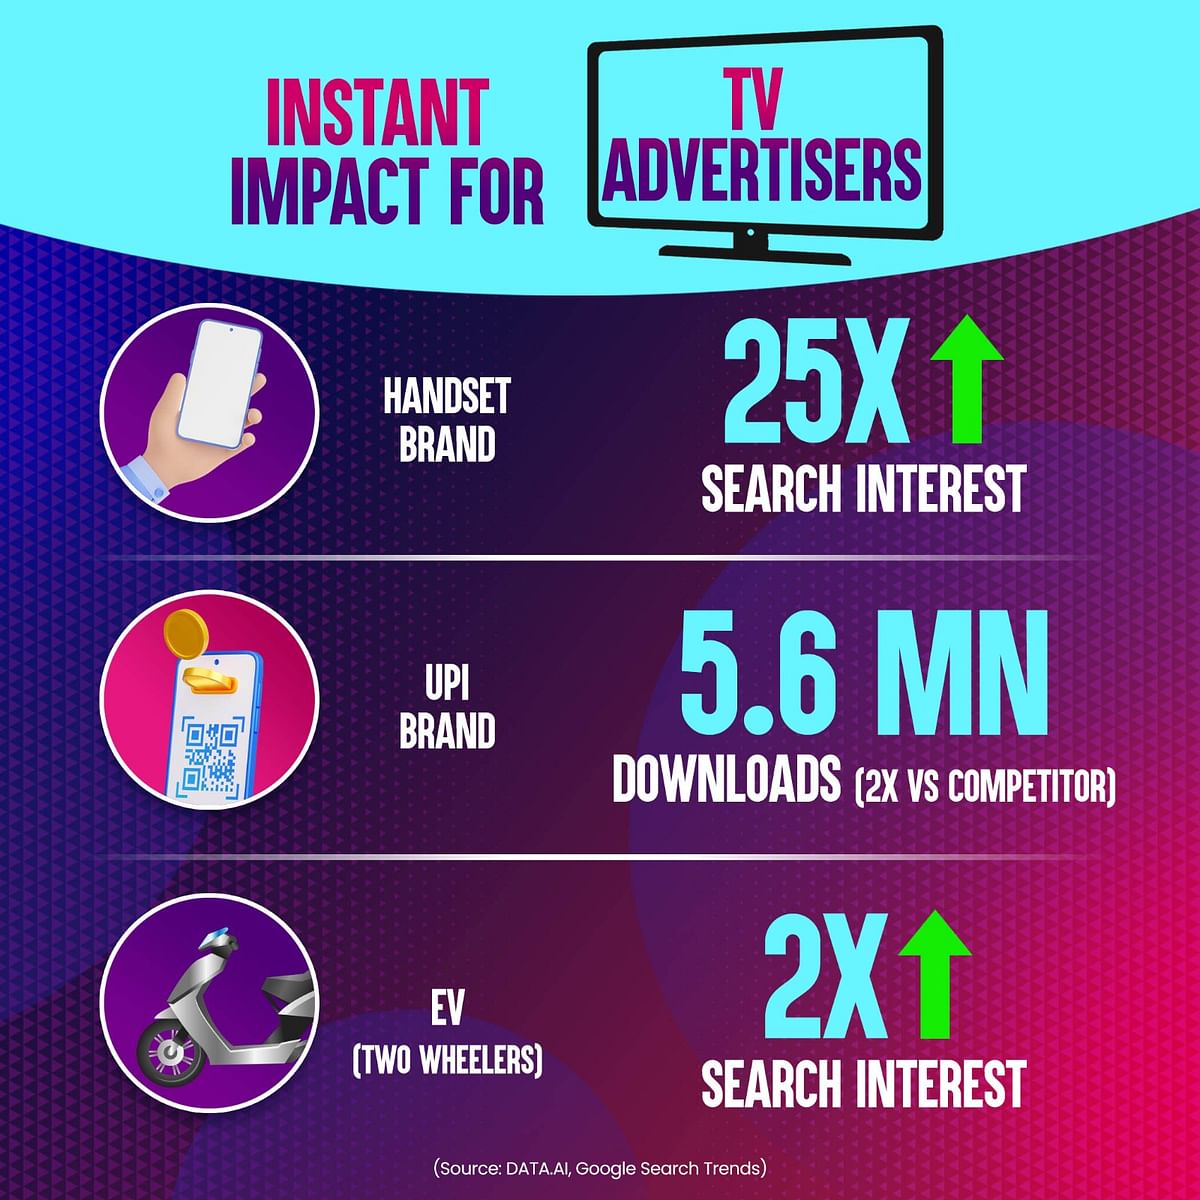 World Cup on Television catapults brand impact by more than 2X across in just 2 weeks